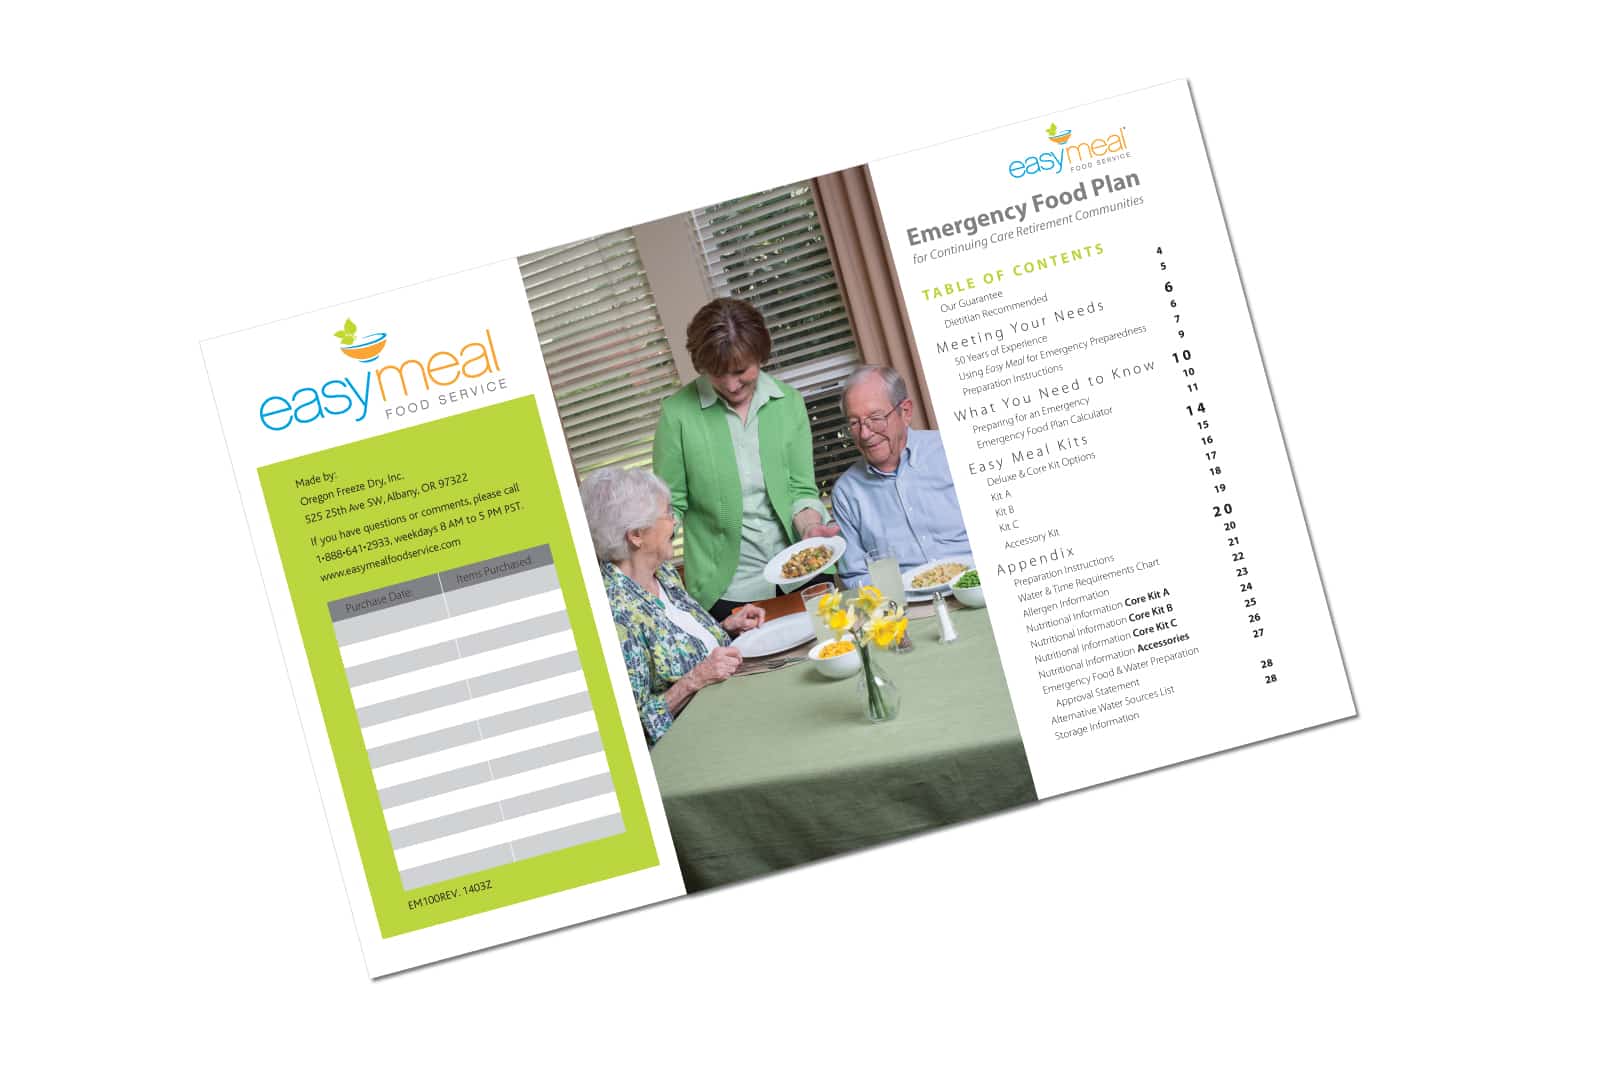 Table of Contents and Book Design for Easy Meal Food Service